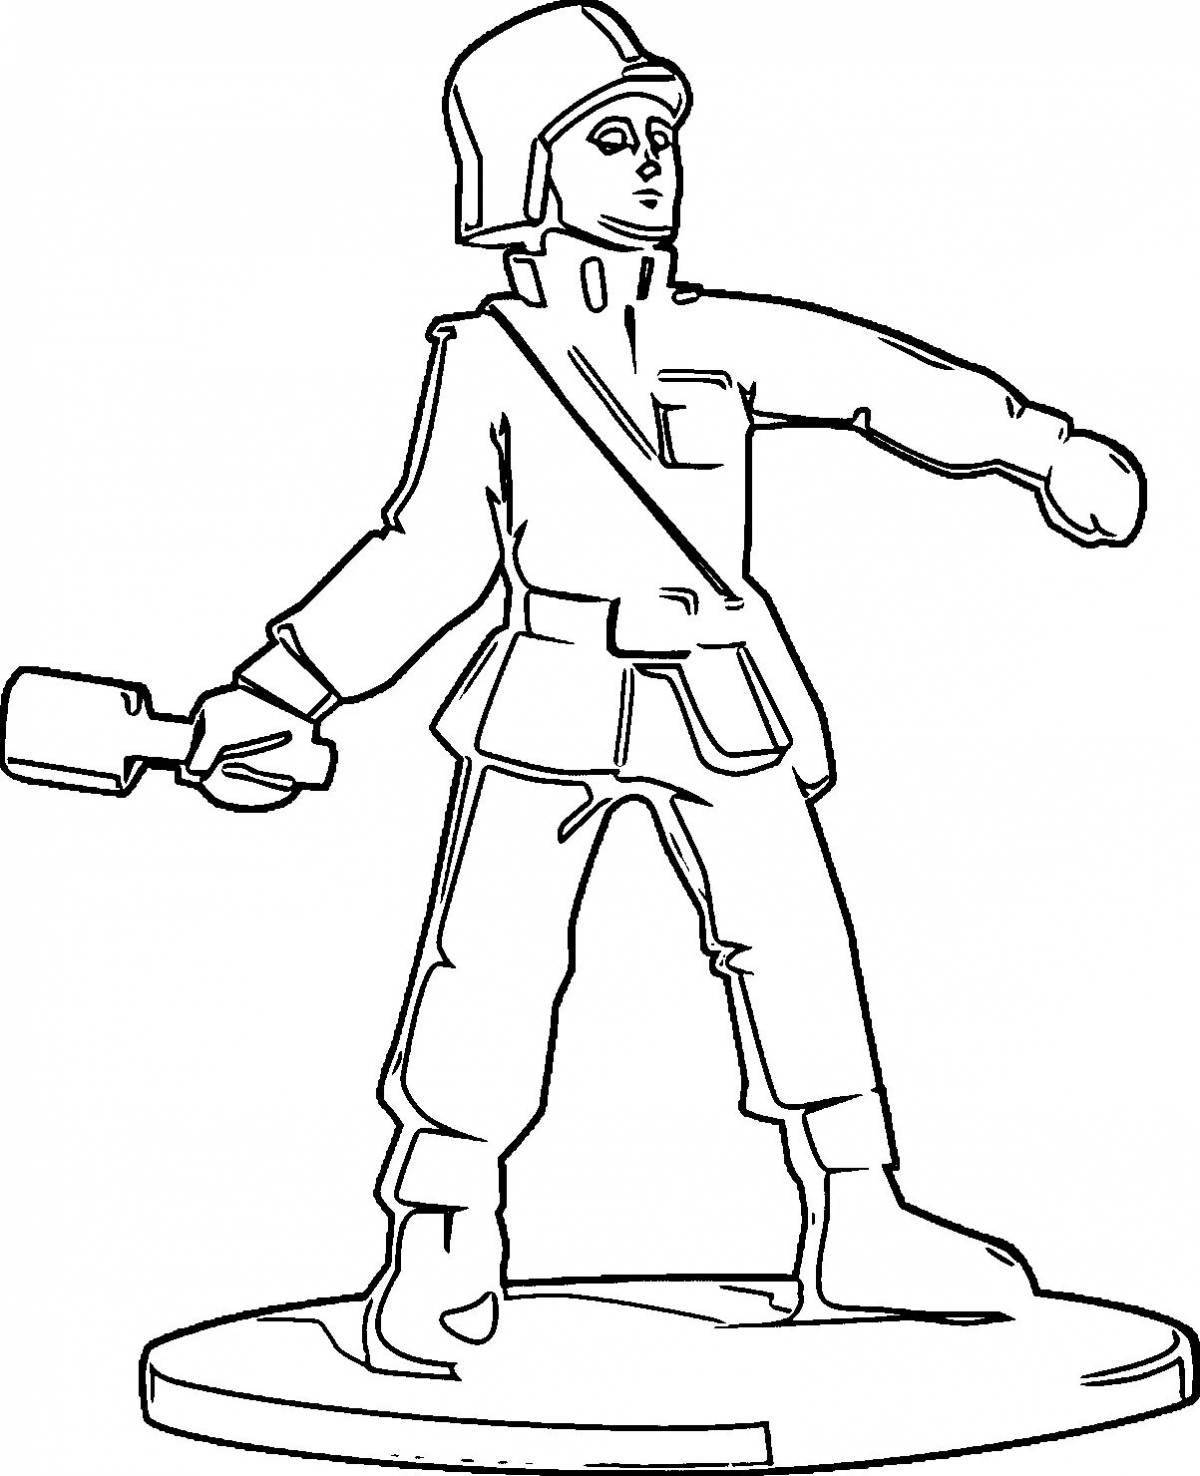 Coloring page charming tin soldier